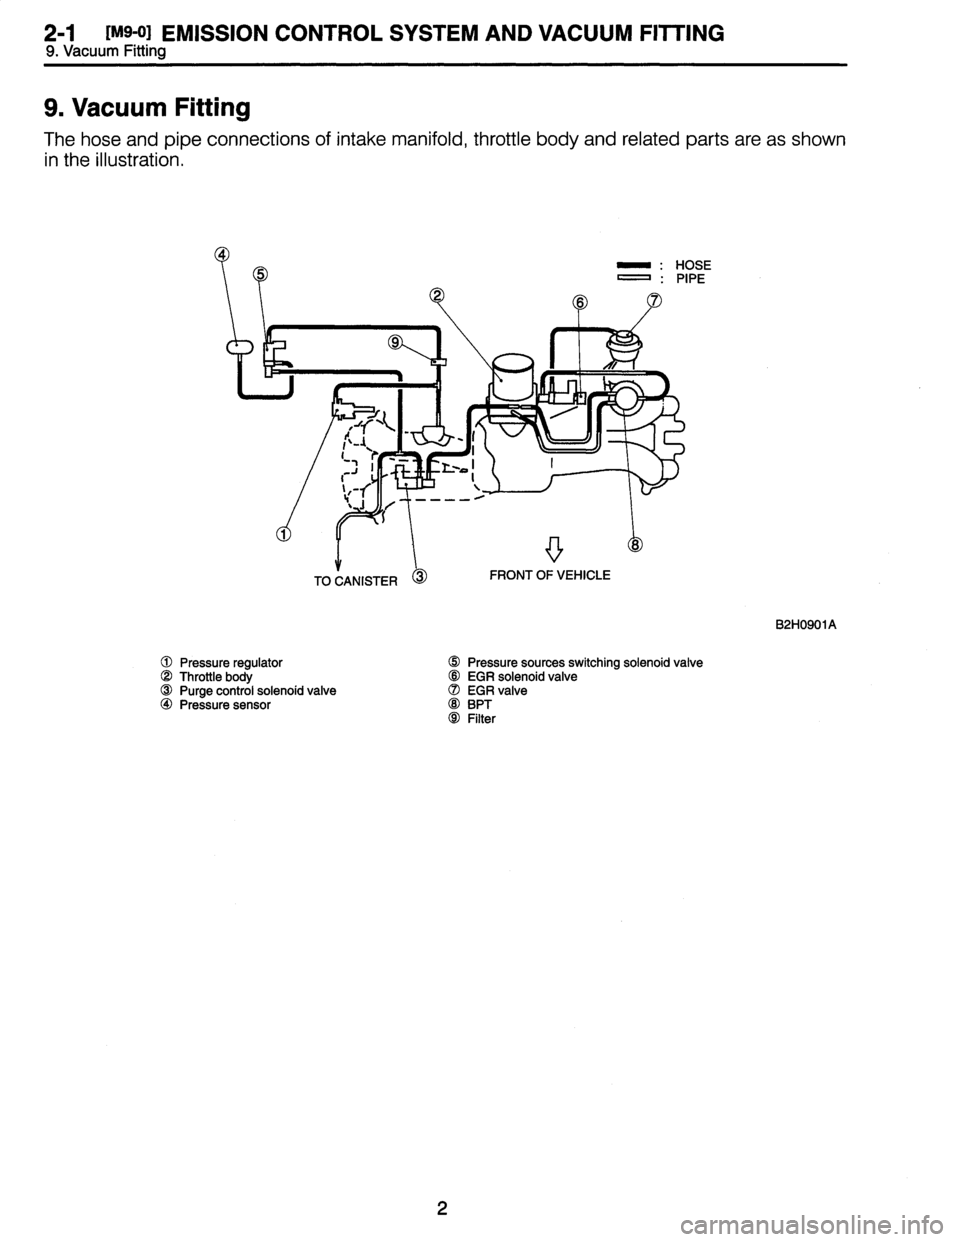 SUBARU LEGACY 1996  Service Repair Manual 
2-1
IM9-0)
EMISSION
CONTROL
SYSTEM
AND
VACUUM
FITTING
9
.
Vacuum
Fitting

9
.
Vacuum
Fitting

The
hose
and
pipe
connections
of
intake
manifold,
throttle
body
and
related
parts
are
as
shown

in
the
il